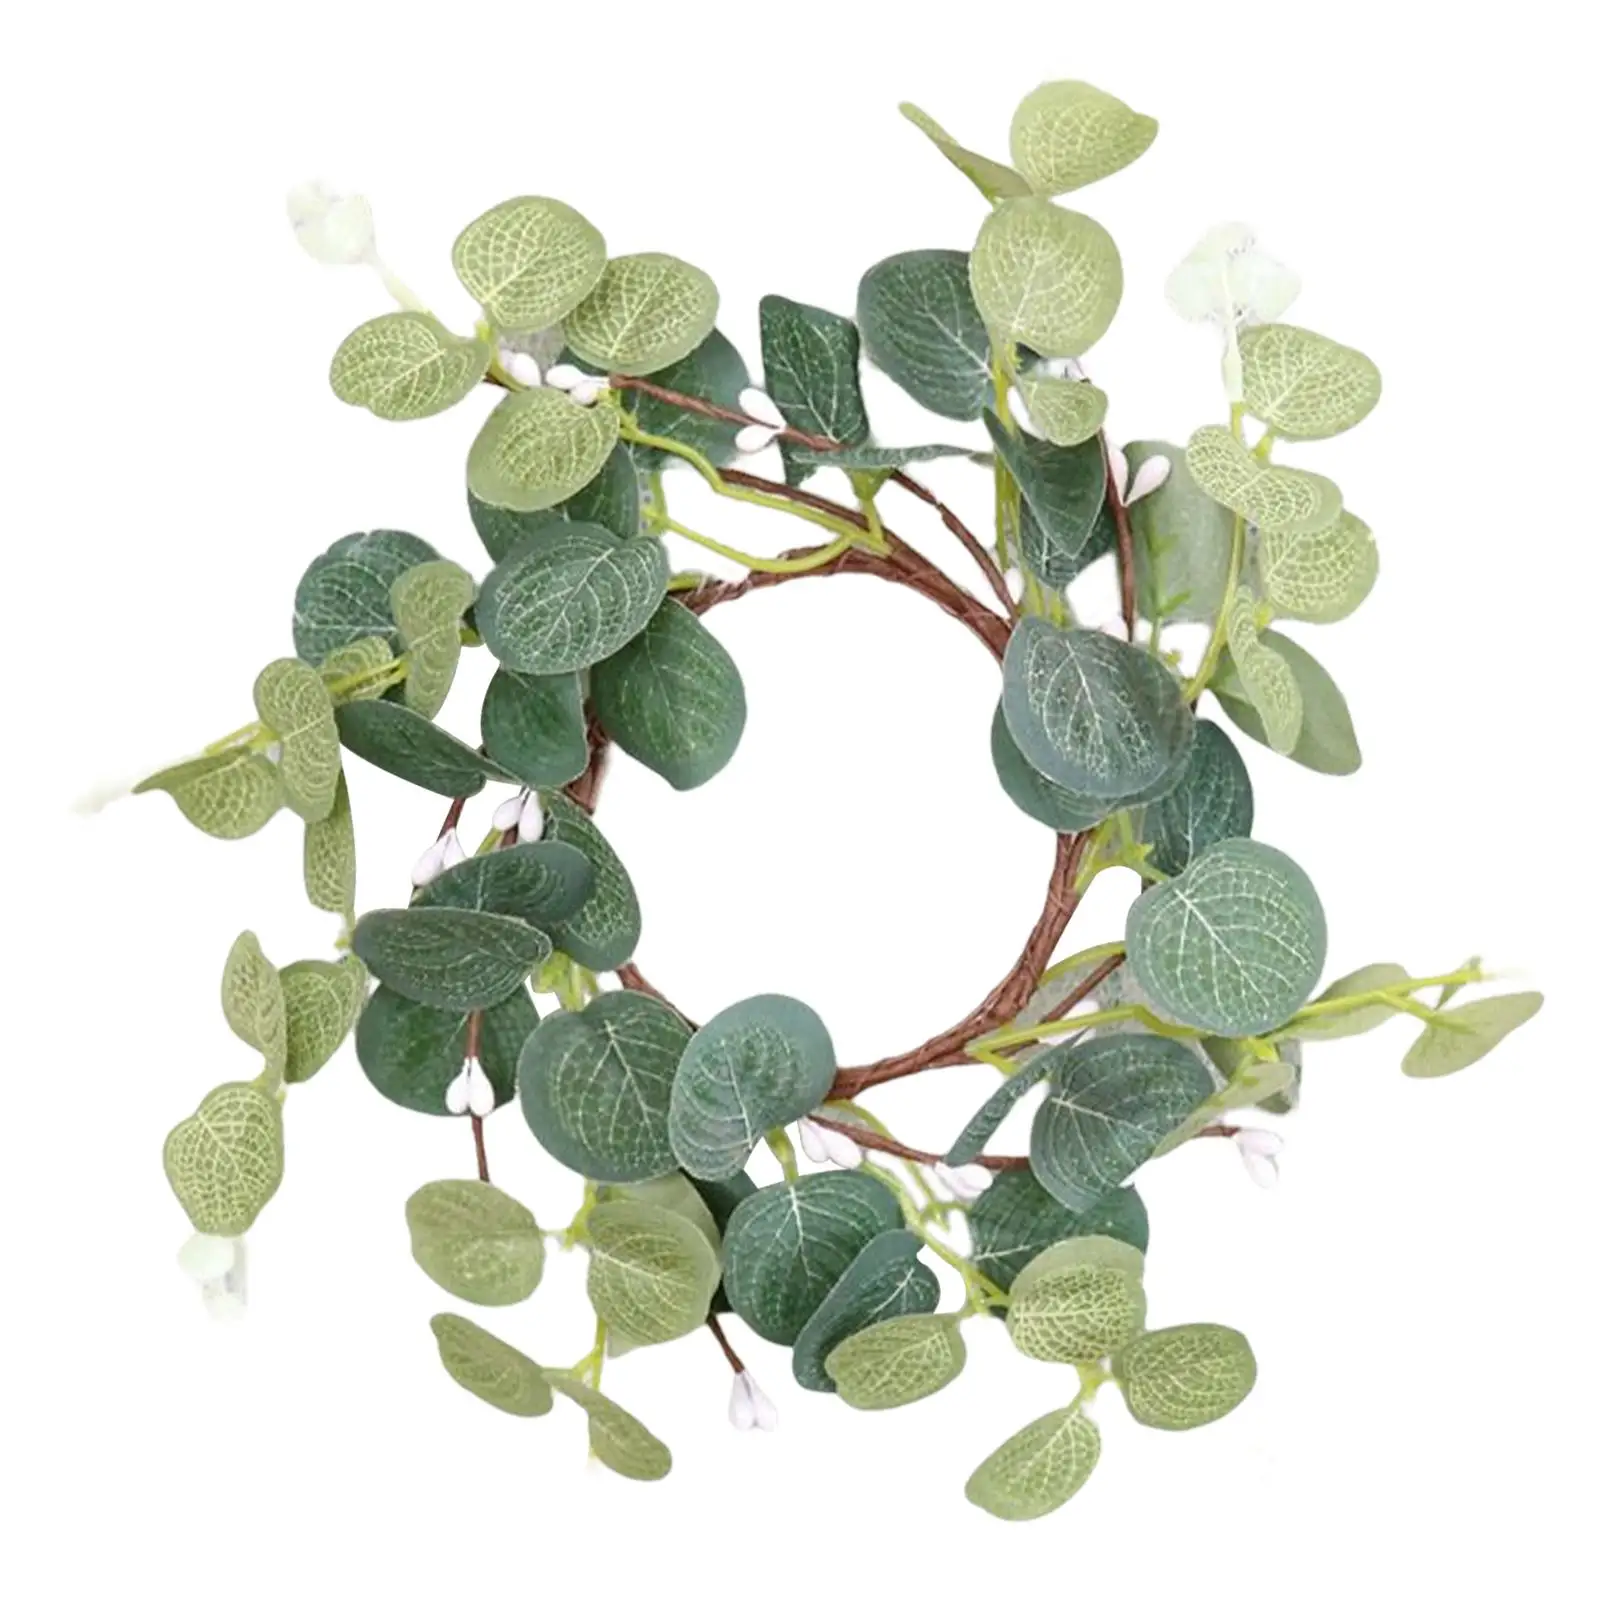 Artificial Easter Candle Wreath Centerpieces Eucalyptus Leaves Wreath Candlestick Candle Holder Wreath for Farmhouse Wall Decor